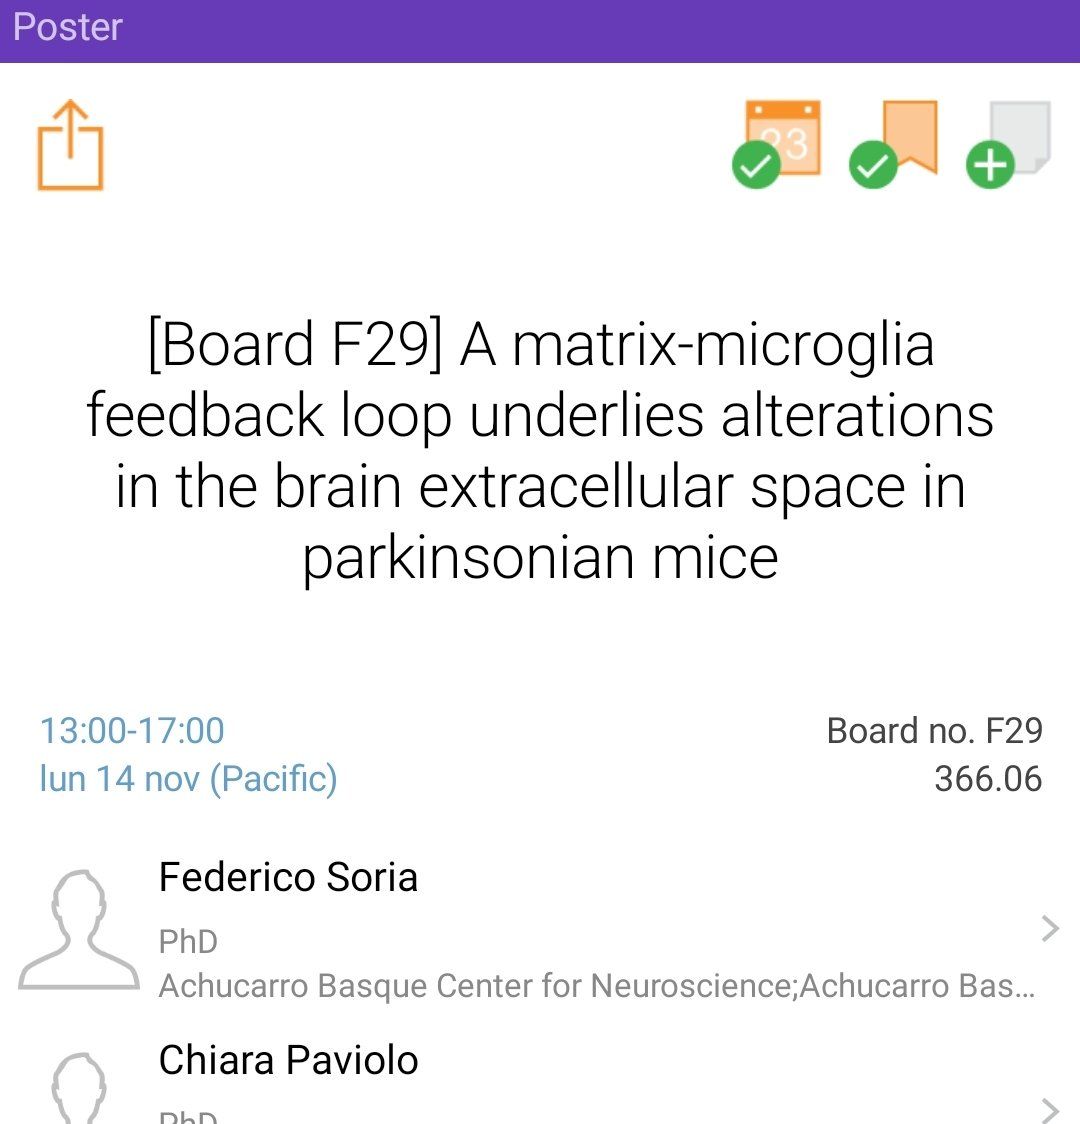 Check out our poster today at #SfN22 #SfN2022. I will be from 2pm-7pm presenting our work on #extracellularmatrix and #microglia in a mouse model of #Parkinson's disease

📍Board F29 - 2:00 PM (Poster 366.06)

Come say hi and let's talk about science! 🙂